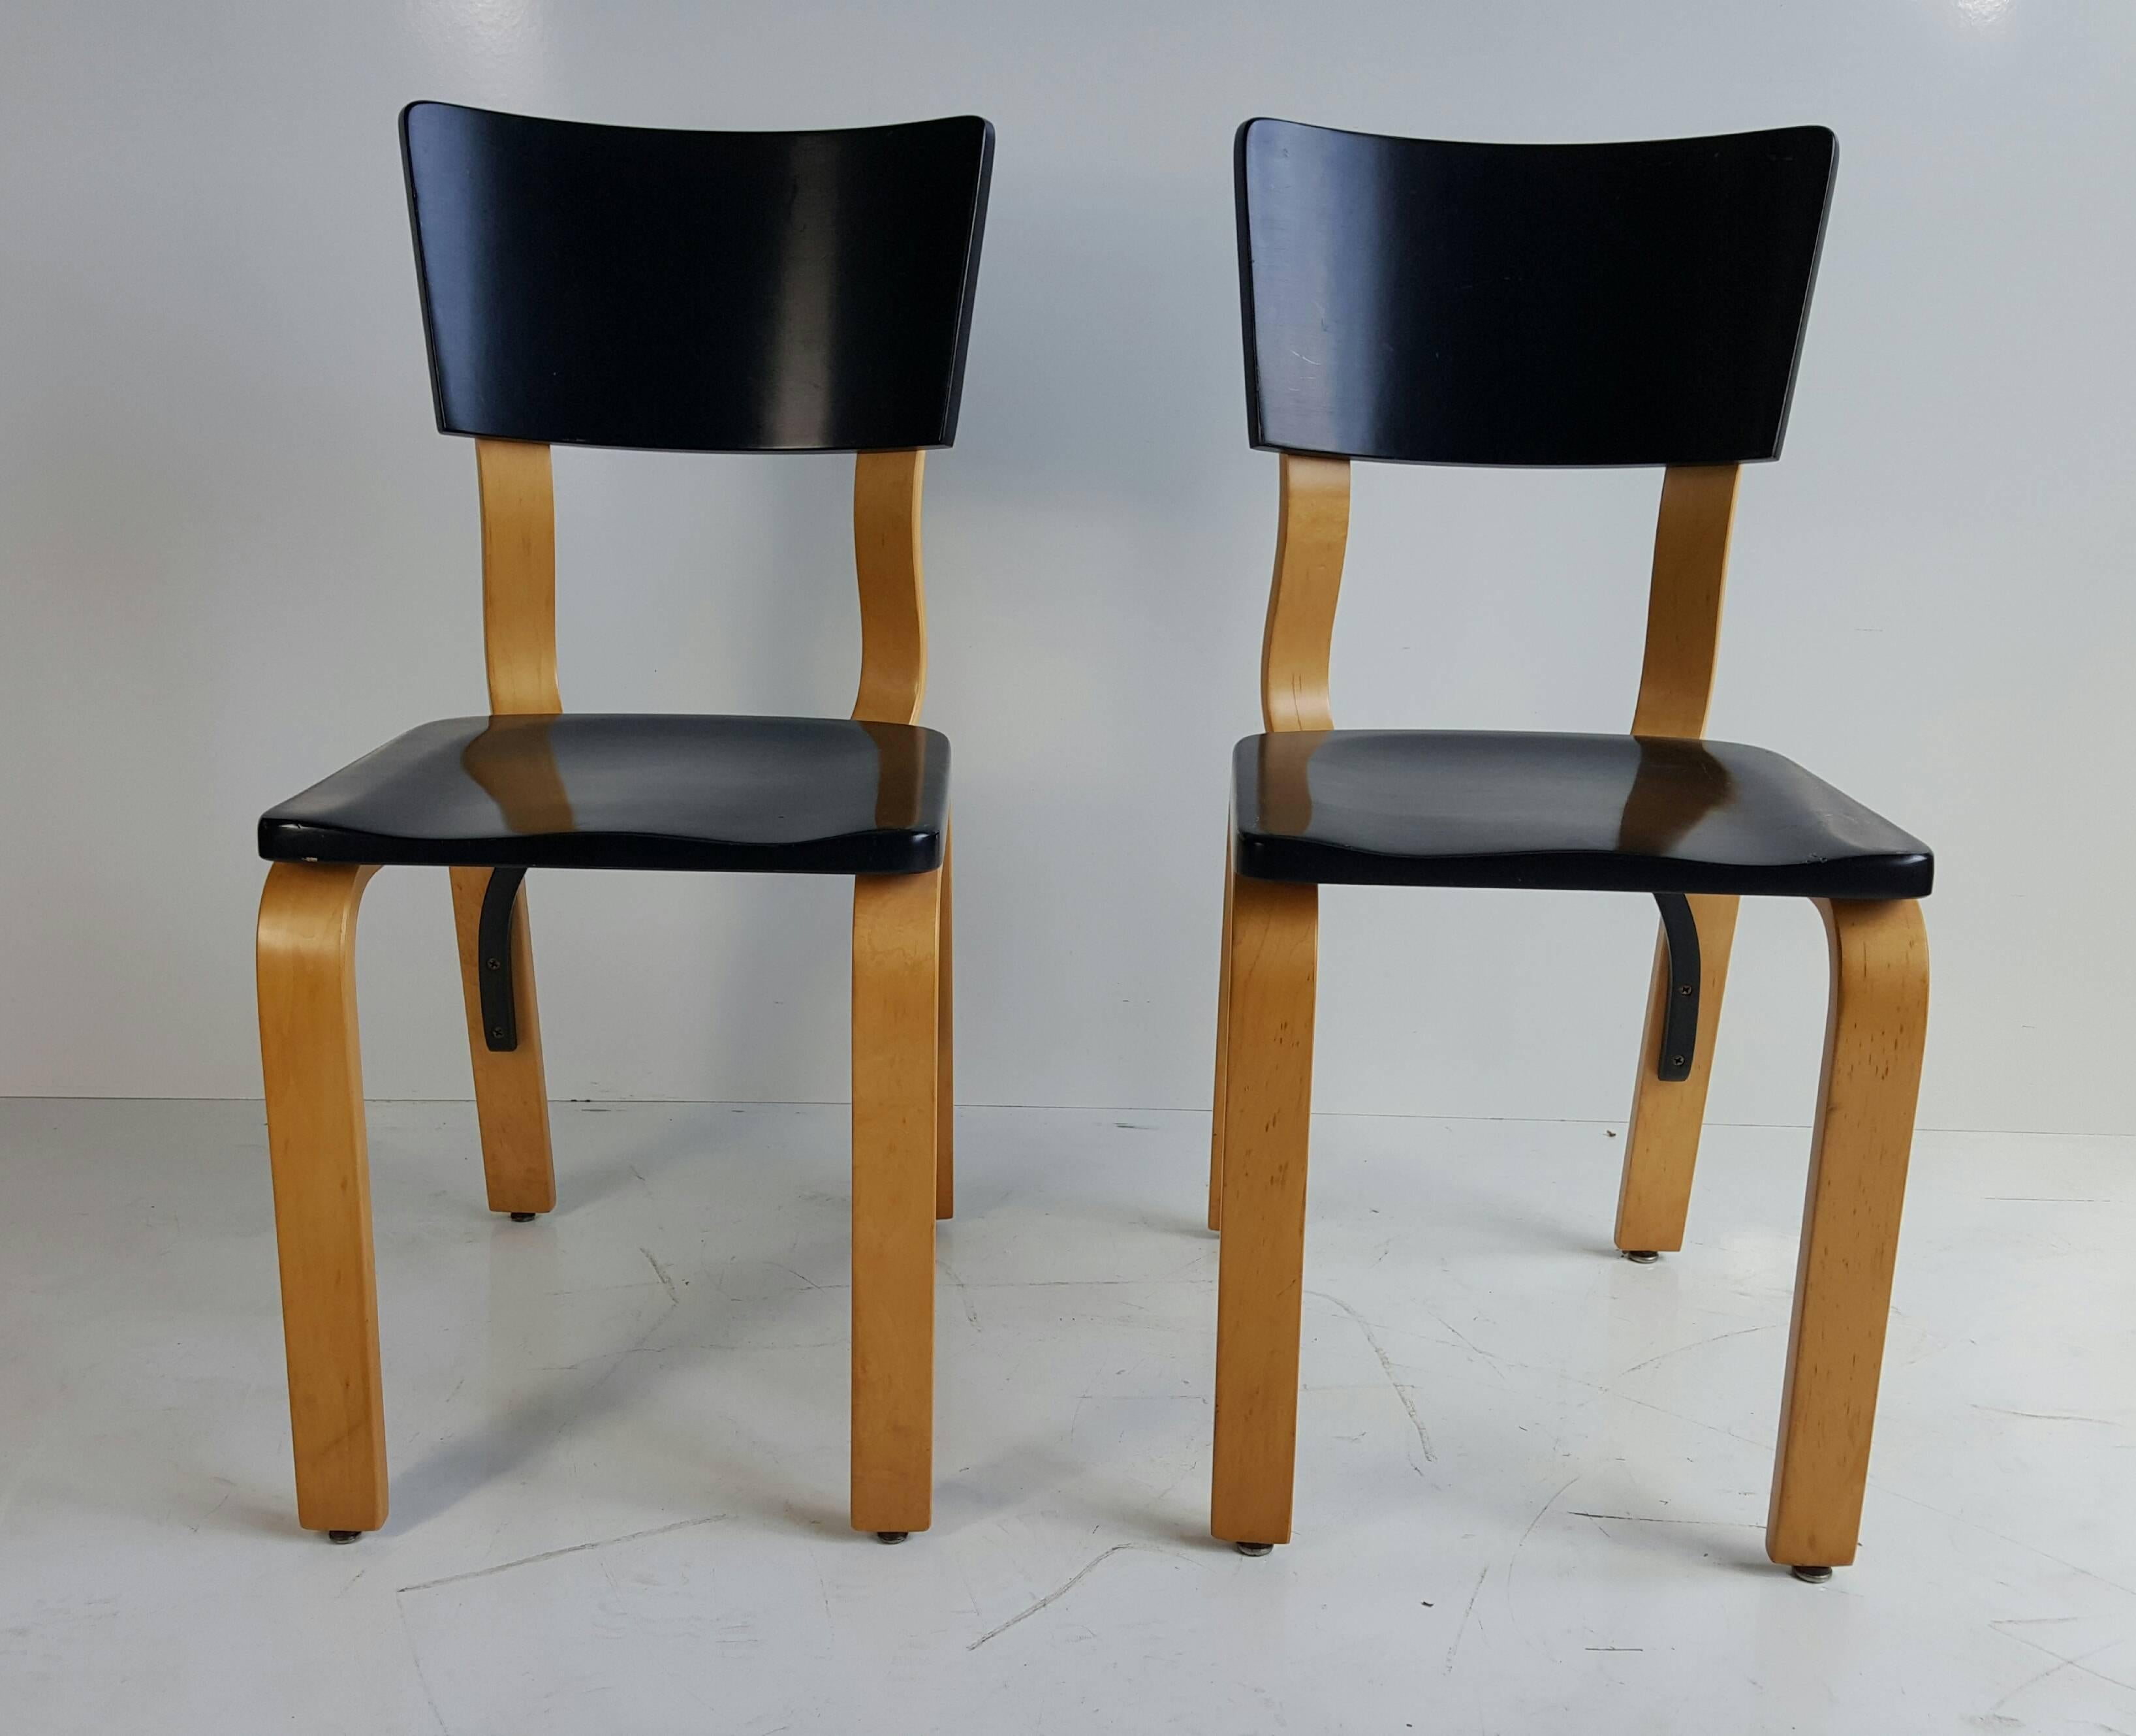 Classic modernist bentwood side chairs by Thonet. Black lacquer seat and back, bent plywood legs and back support.